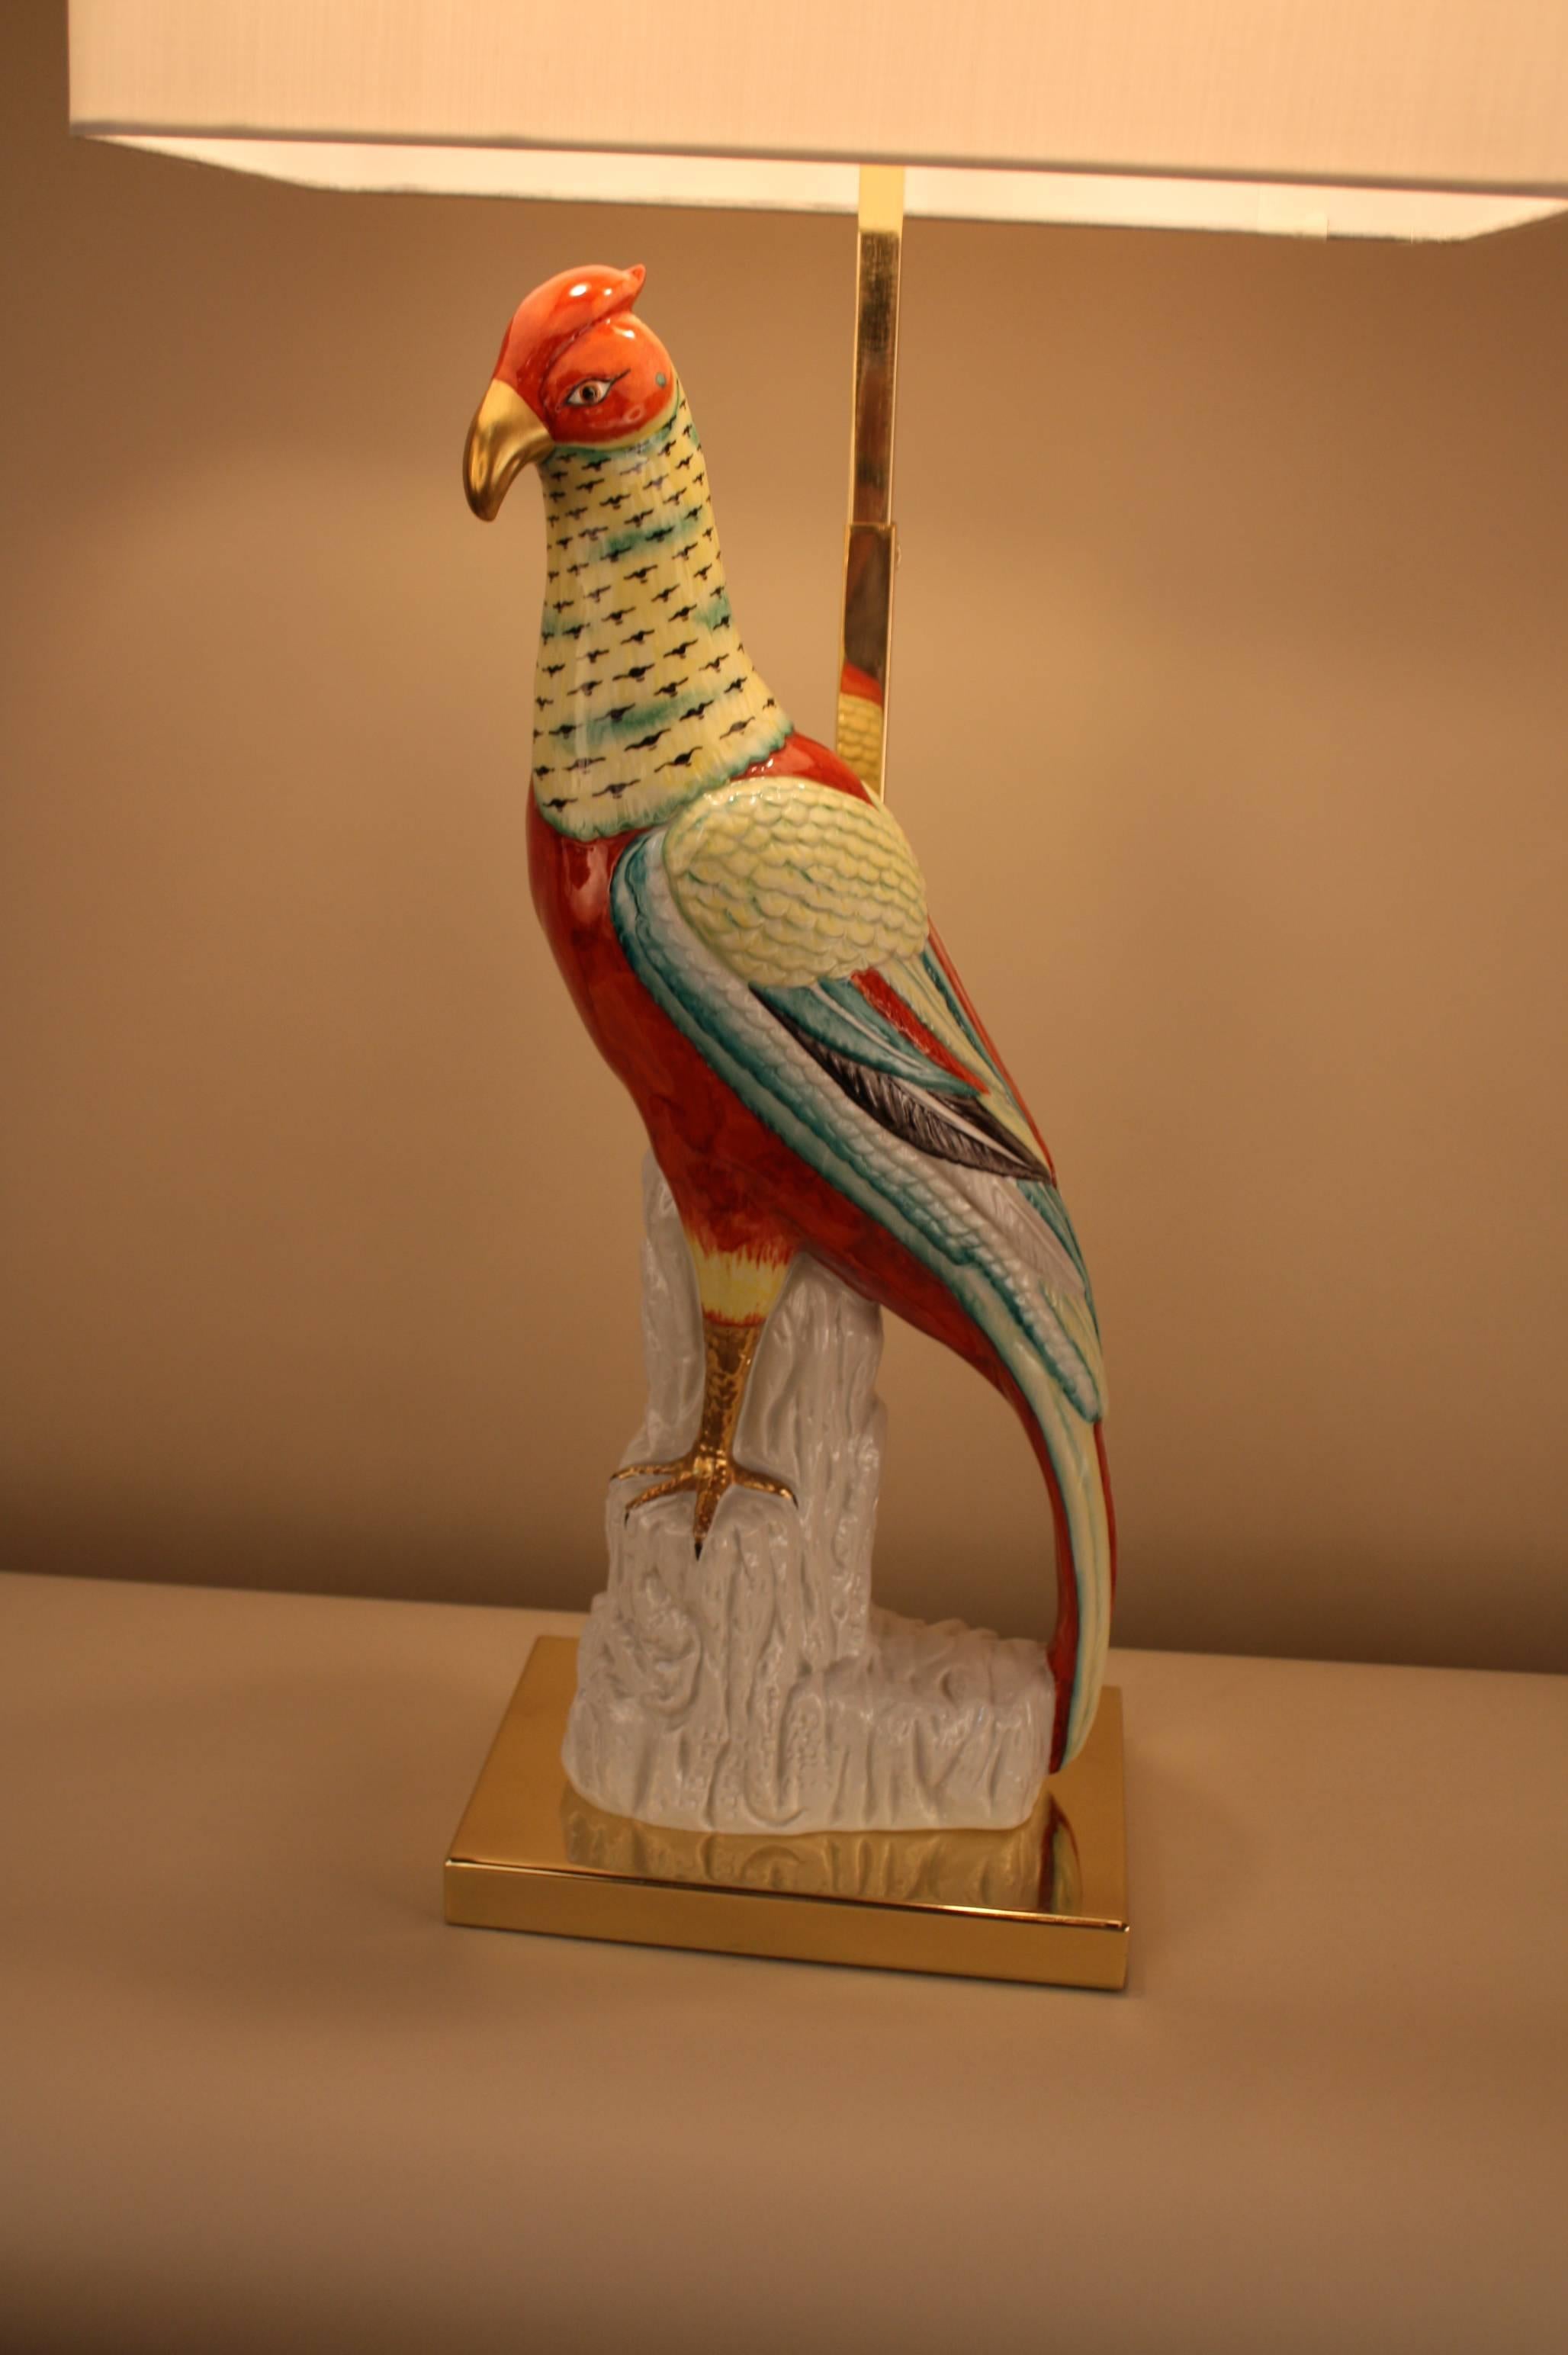 A fantastic adjustable height custom-made lamp with polished bronze base and multi color porcelain bird.
Measurement is including the shade.